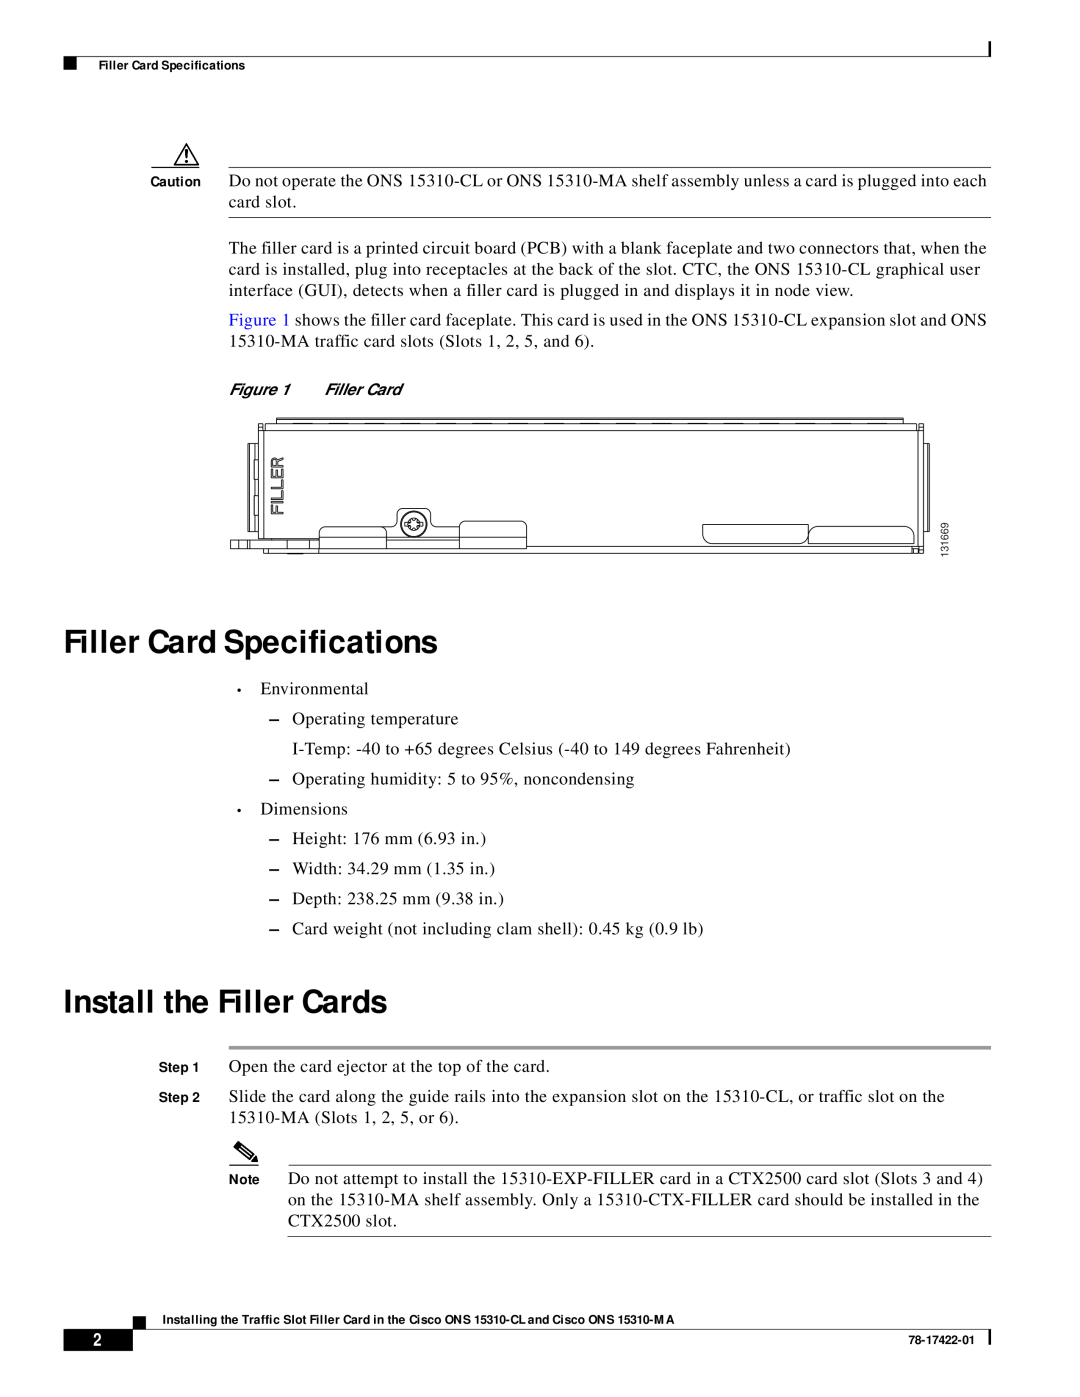 Cisco Systems 15310-MA, 15310-CL specifications Filler Card Specifications, Install the Filler Cards 